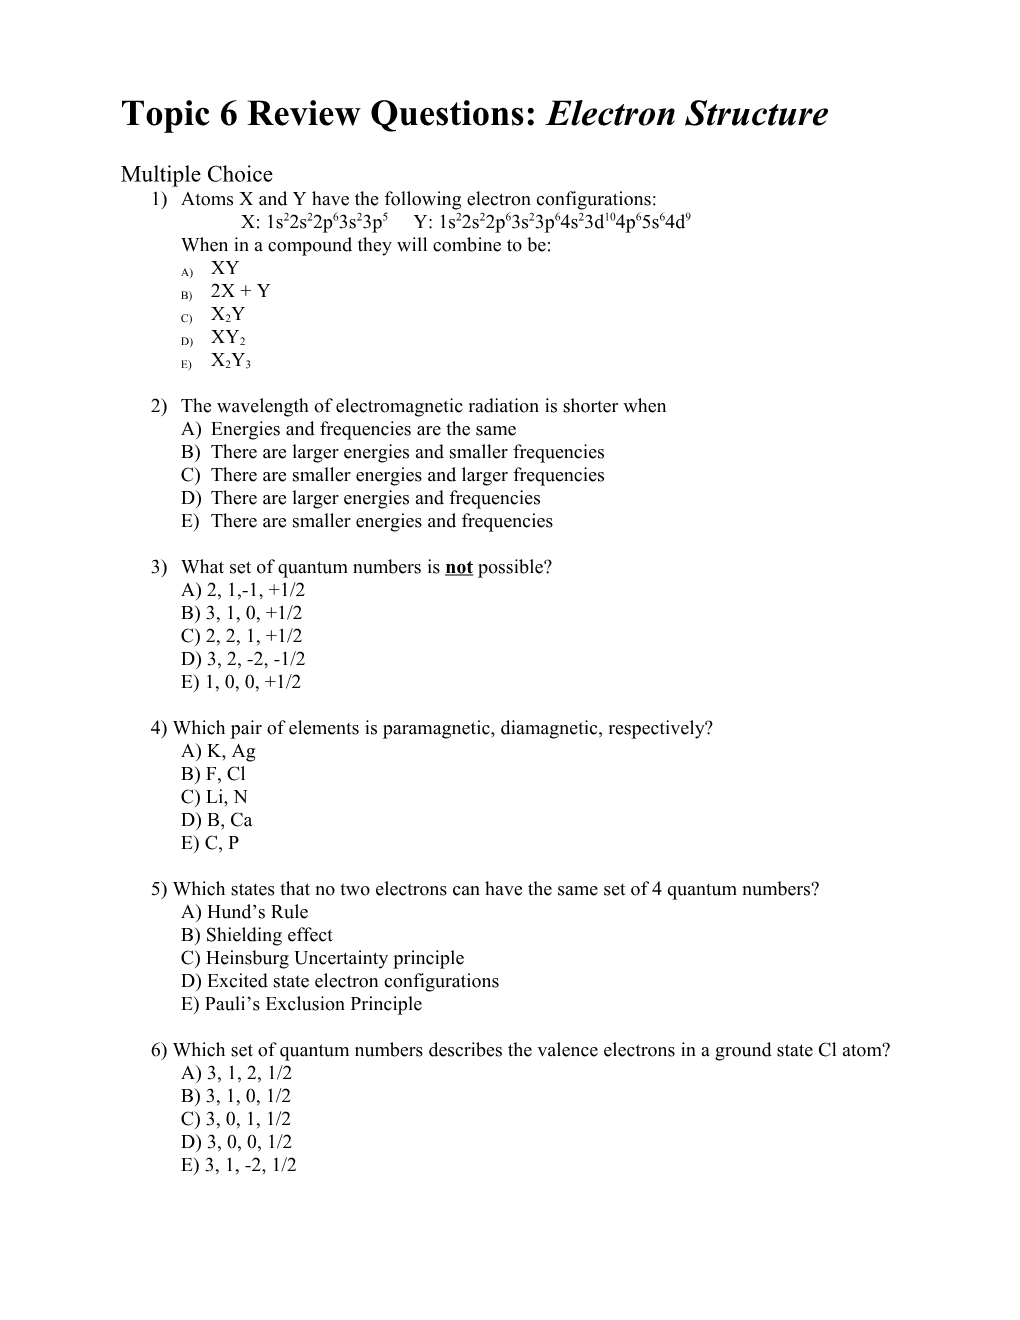 Topic 6 Review Questions: Electron Structure